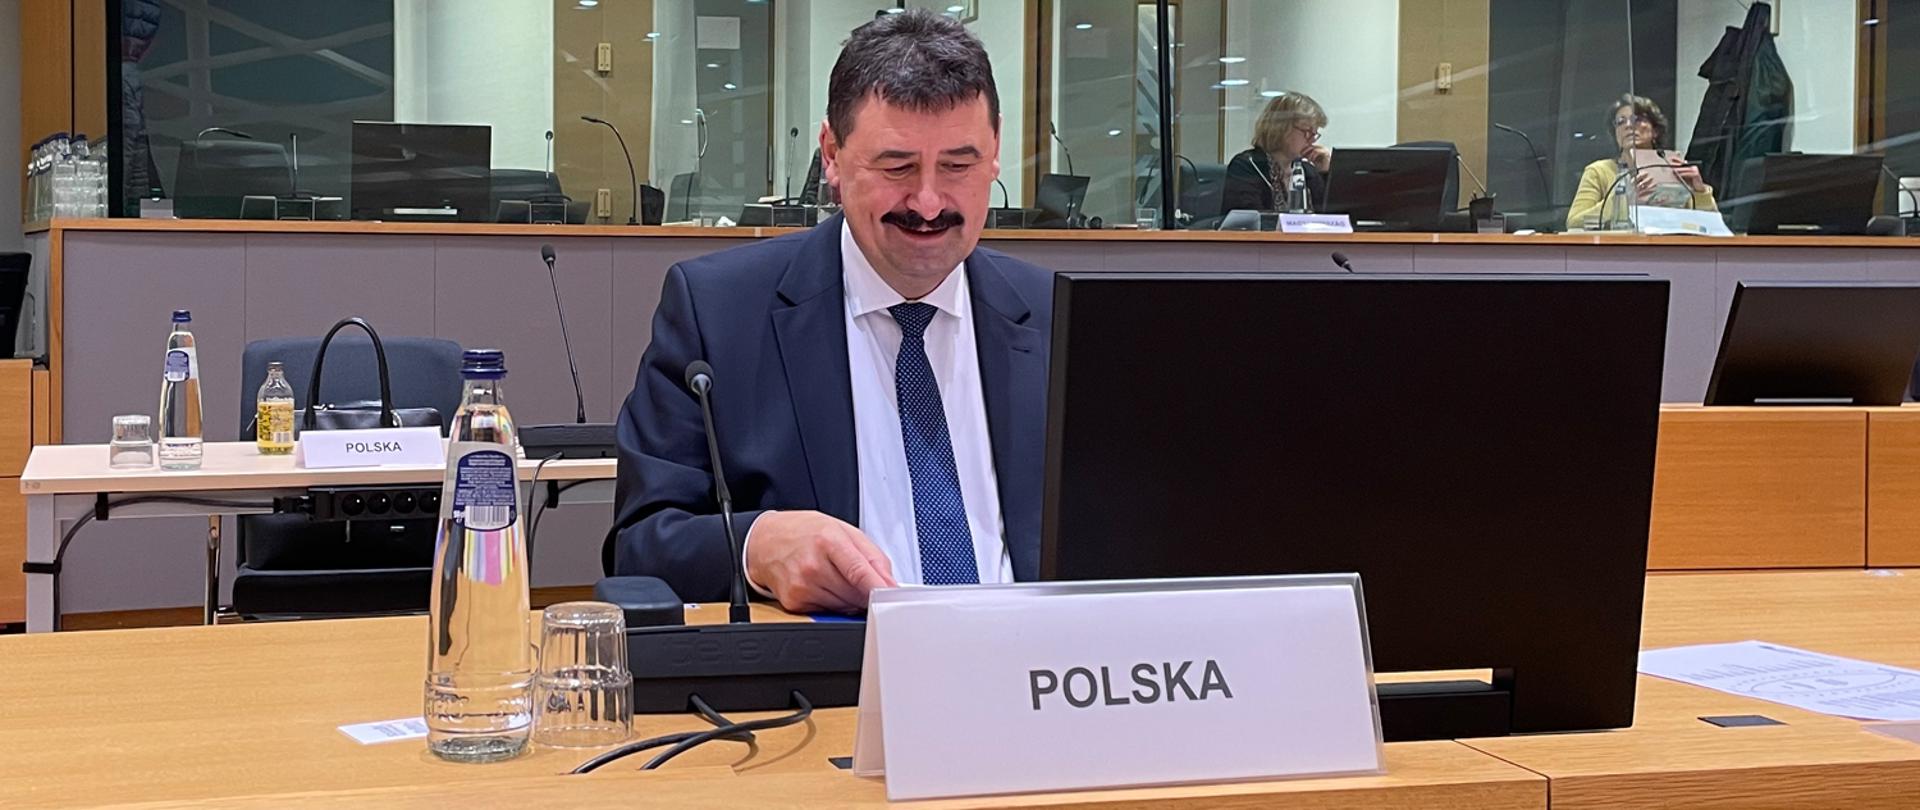 The Secretary of State Ryszard Bartosik at a Council meeting